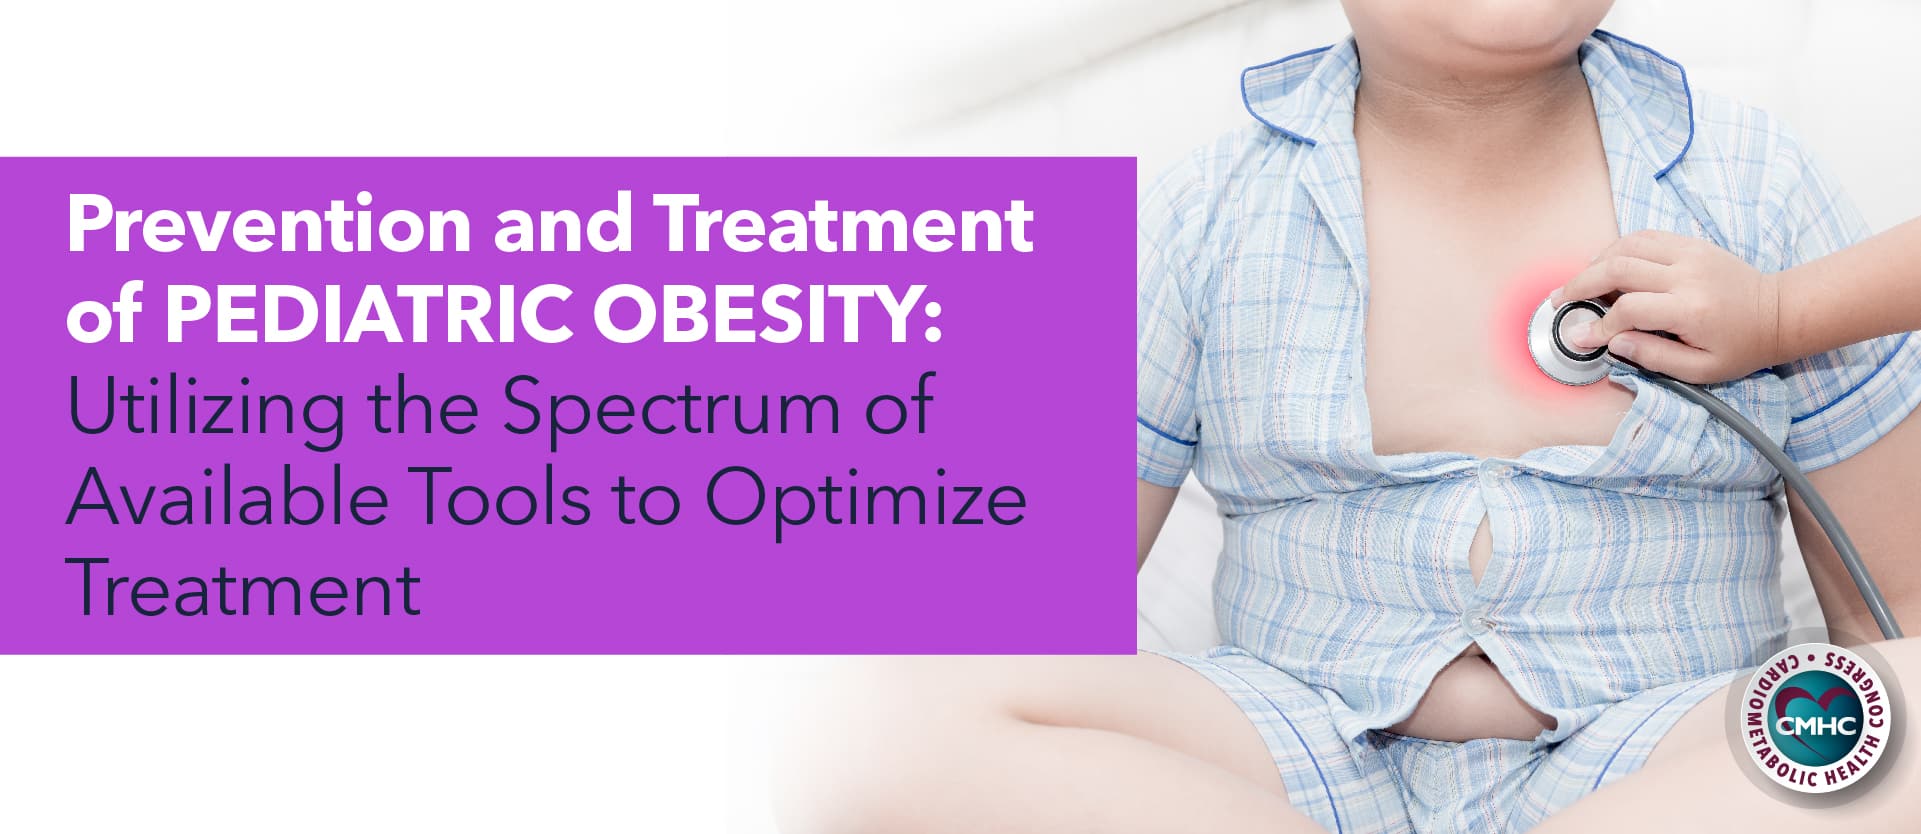 Prevention and Treatment of Pediatric Obesity: Utilizing the Spectrum of Available Tools to Optimize Treatment